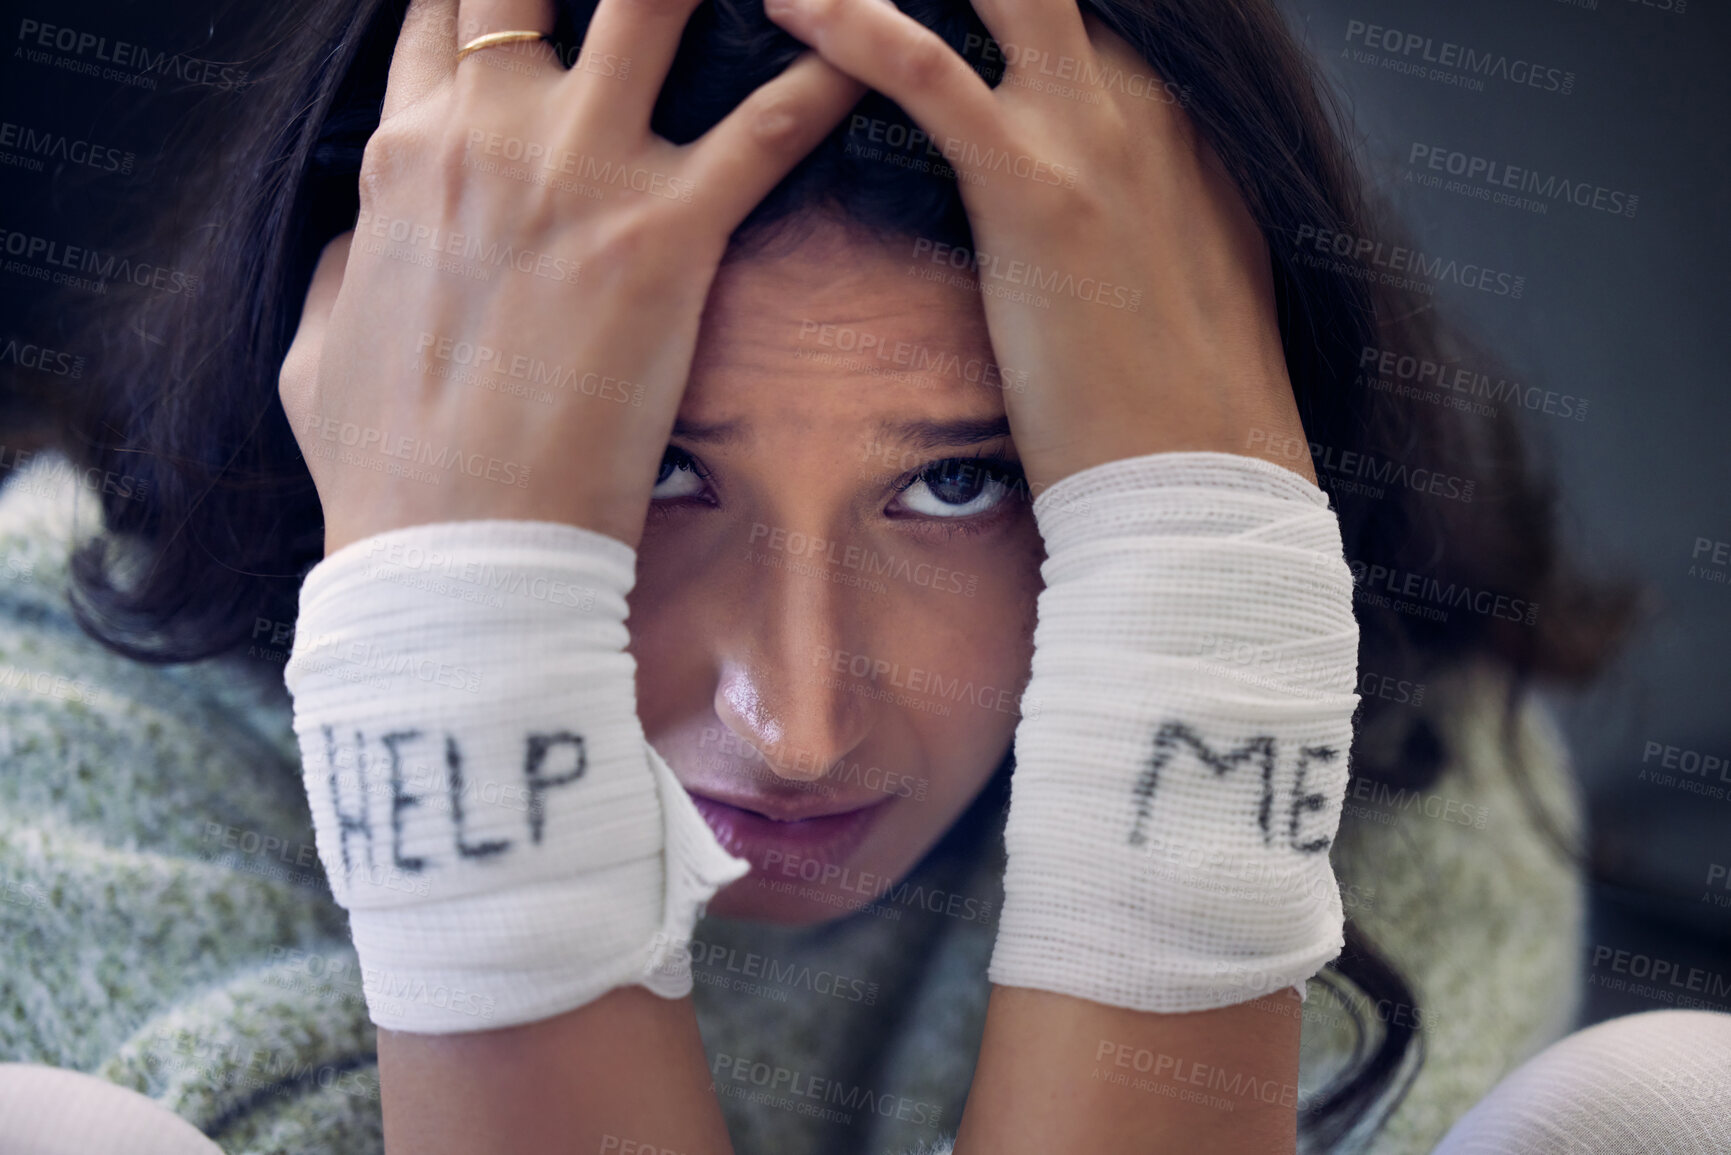 Buy stock photo Depression, wrist and woman with help on bandage for suicide, self harm or person in dark mental health crisis. Portrait, girl and injury from depressed accident, problem or mistake in cutting wrists